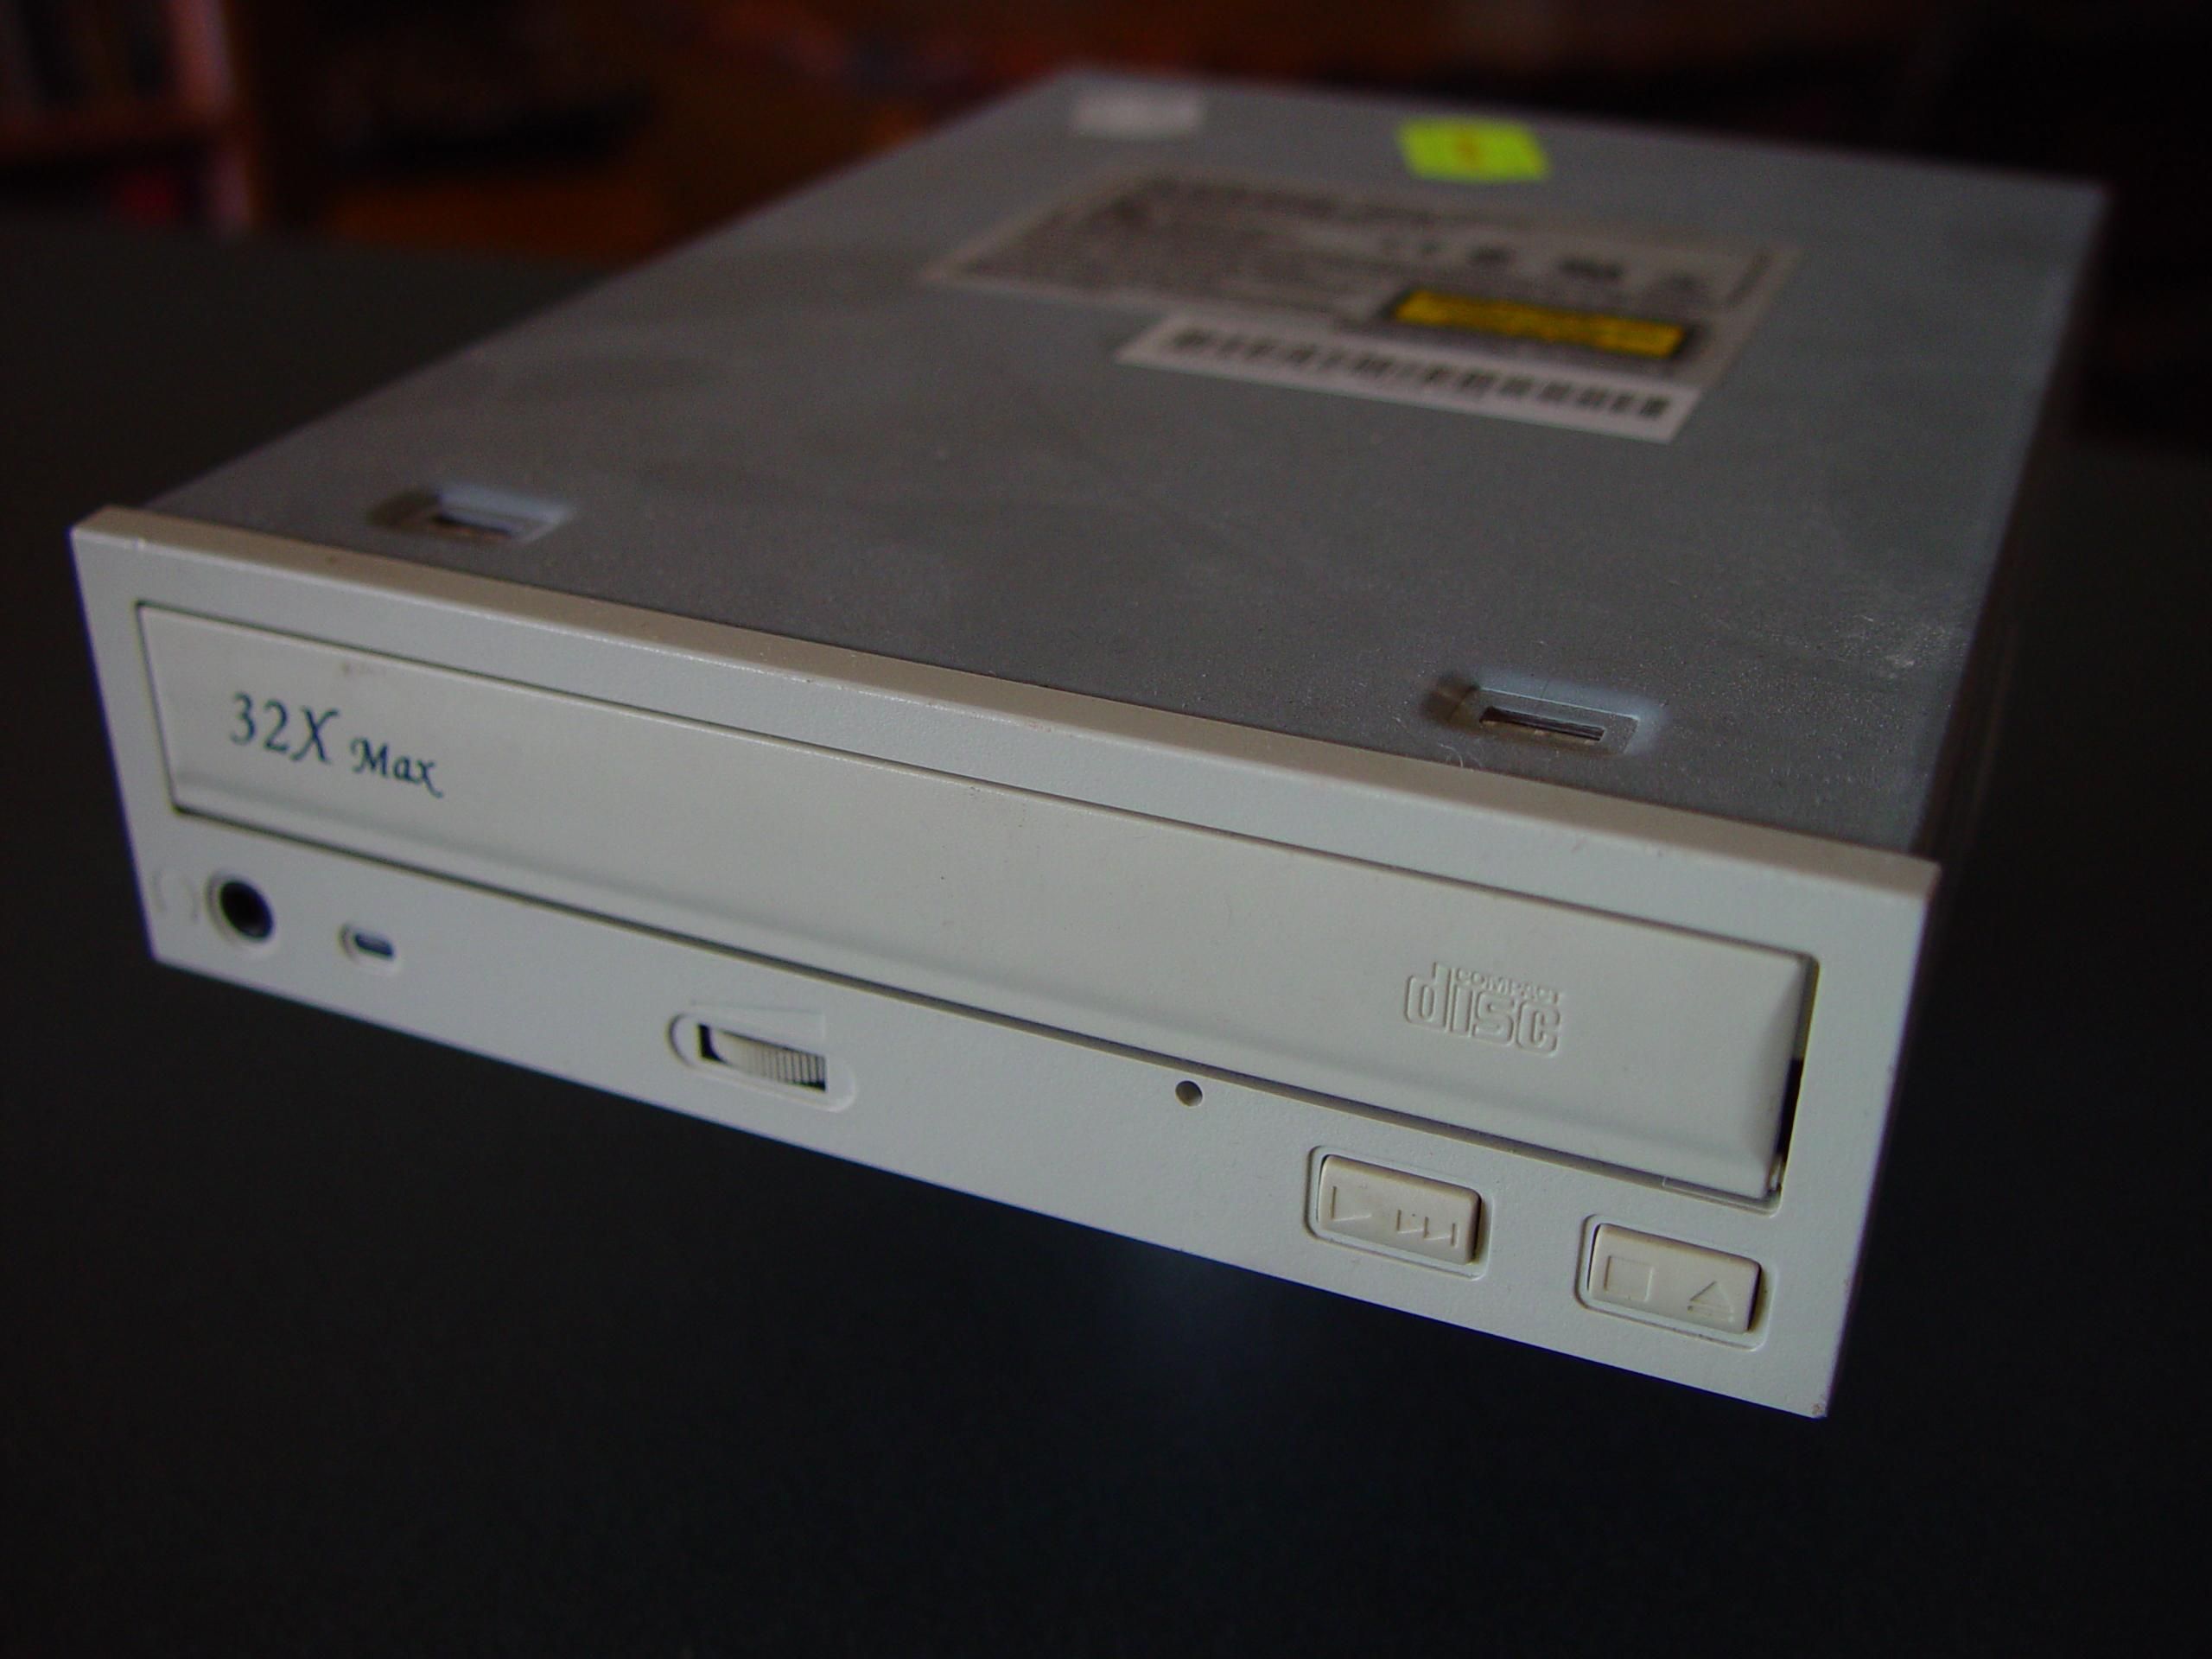 File:Cd rom drive front panel view.jpg - Wikimedia Commons